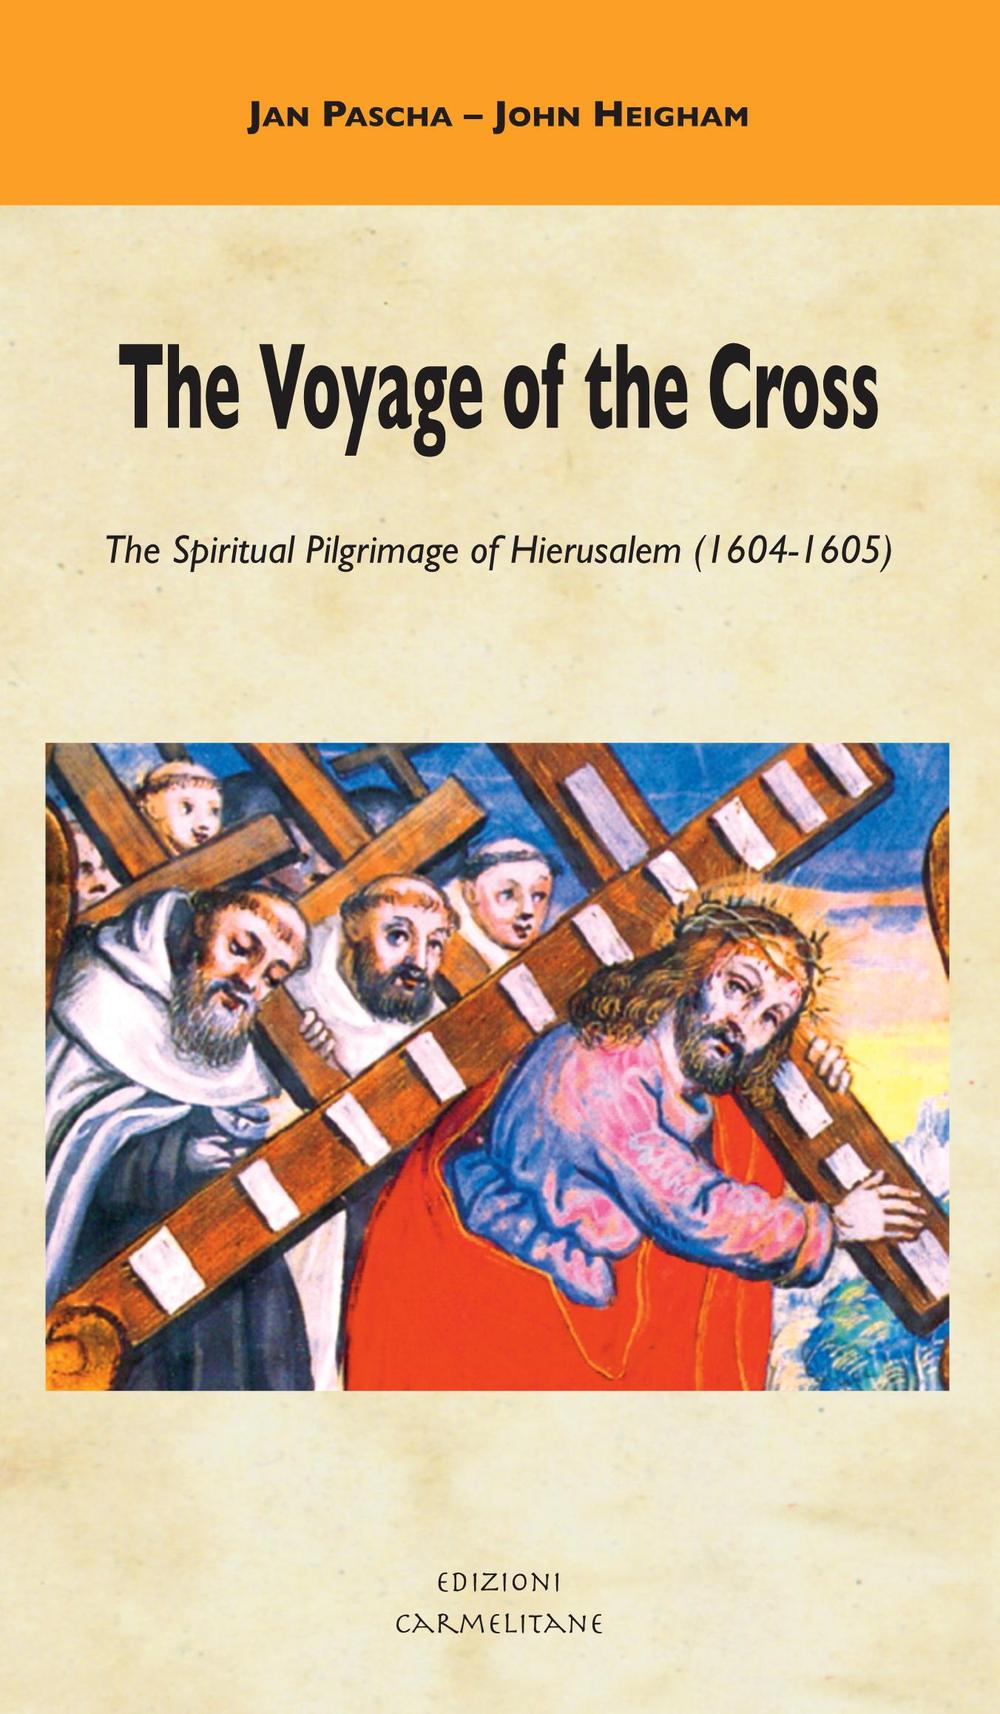 The Voyage of the Cross. The Spiritual Pilgrimage of Hierusalem (1604-1605)